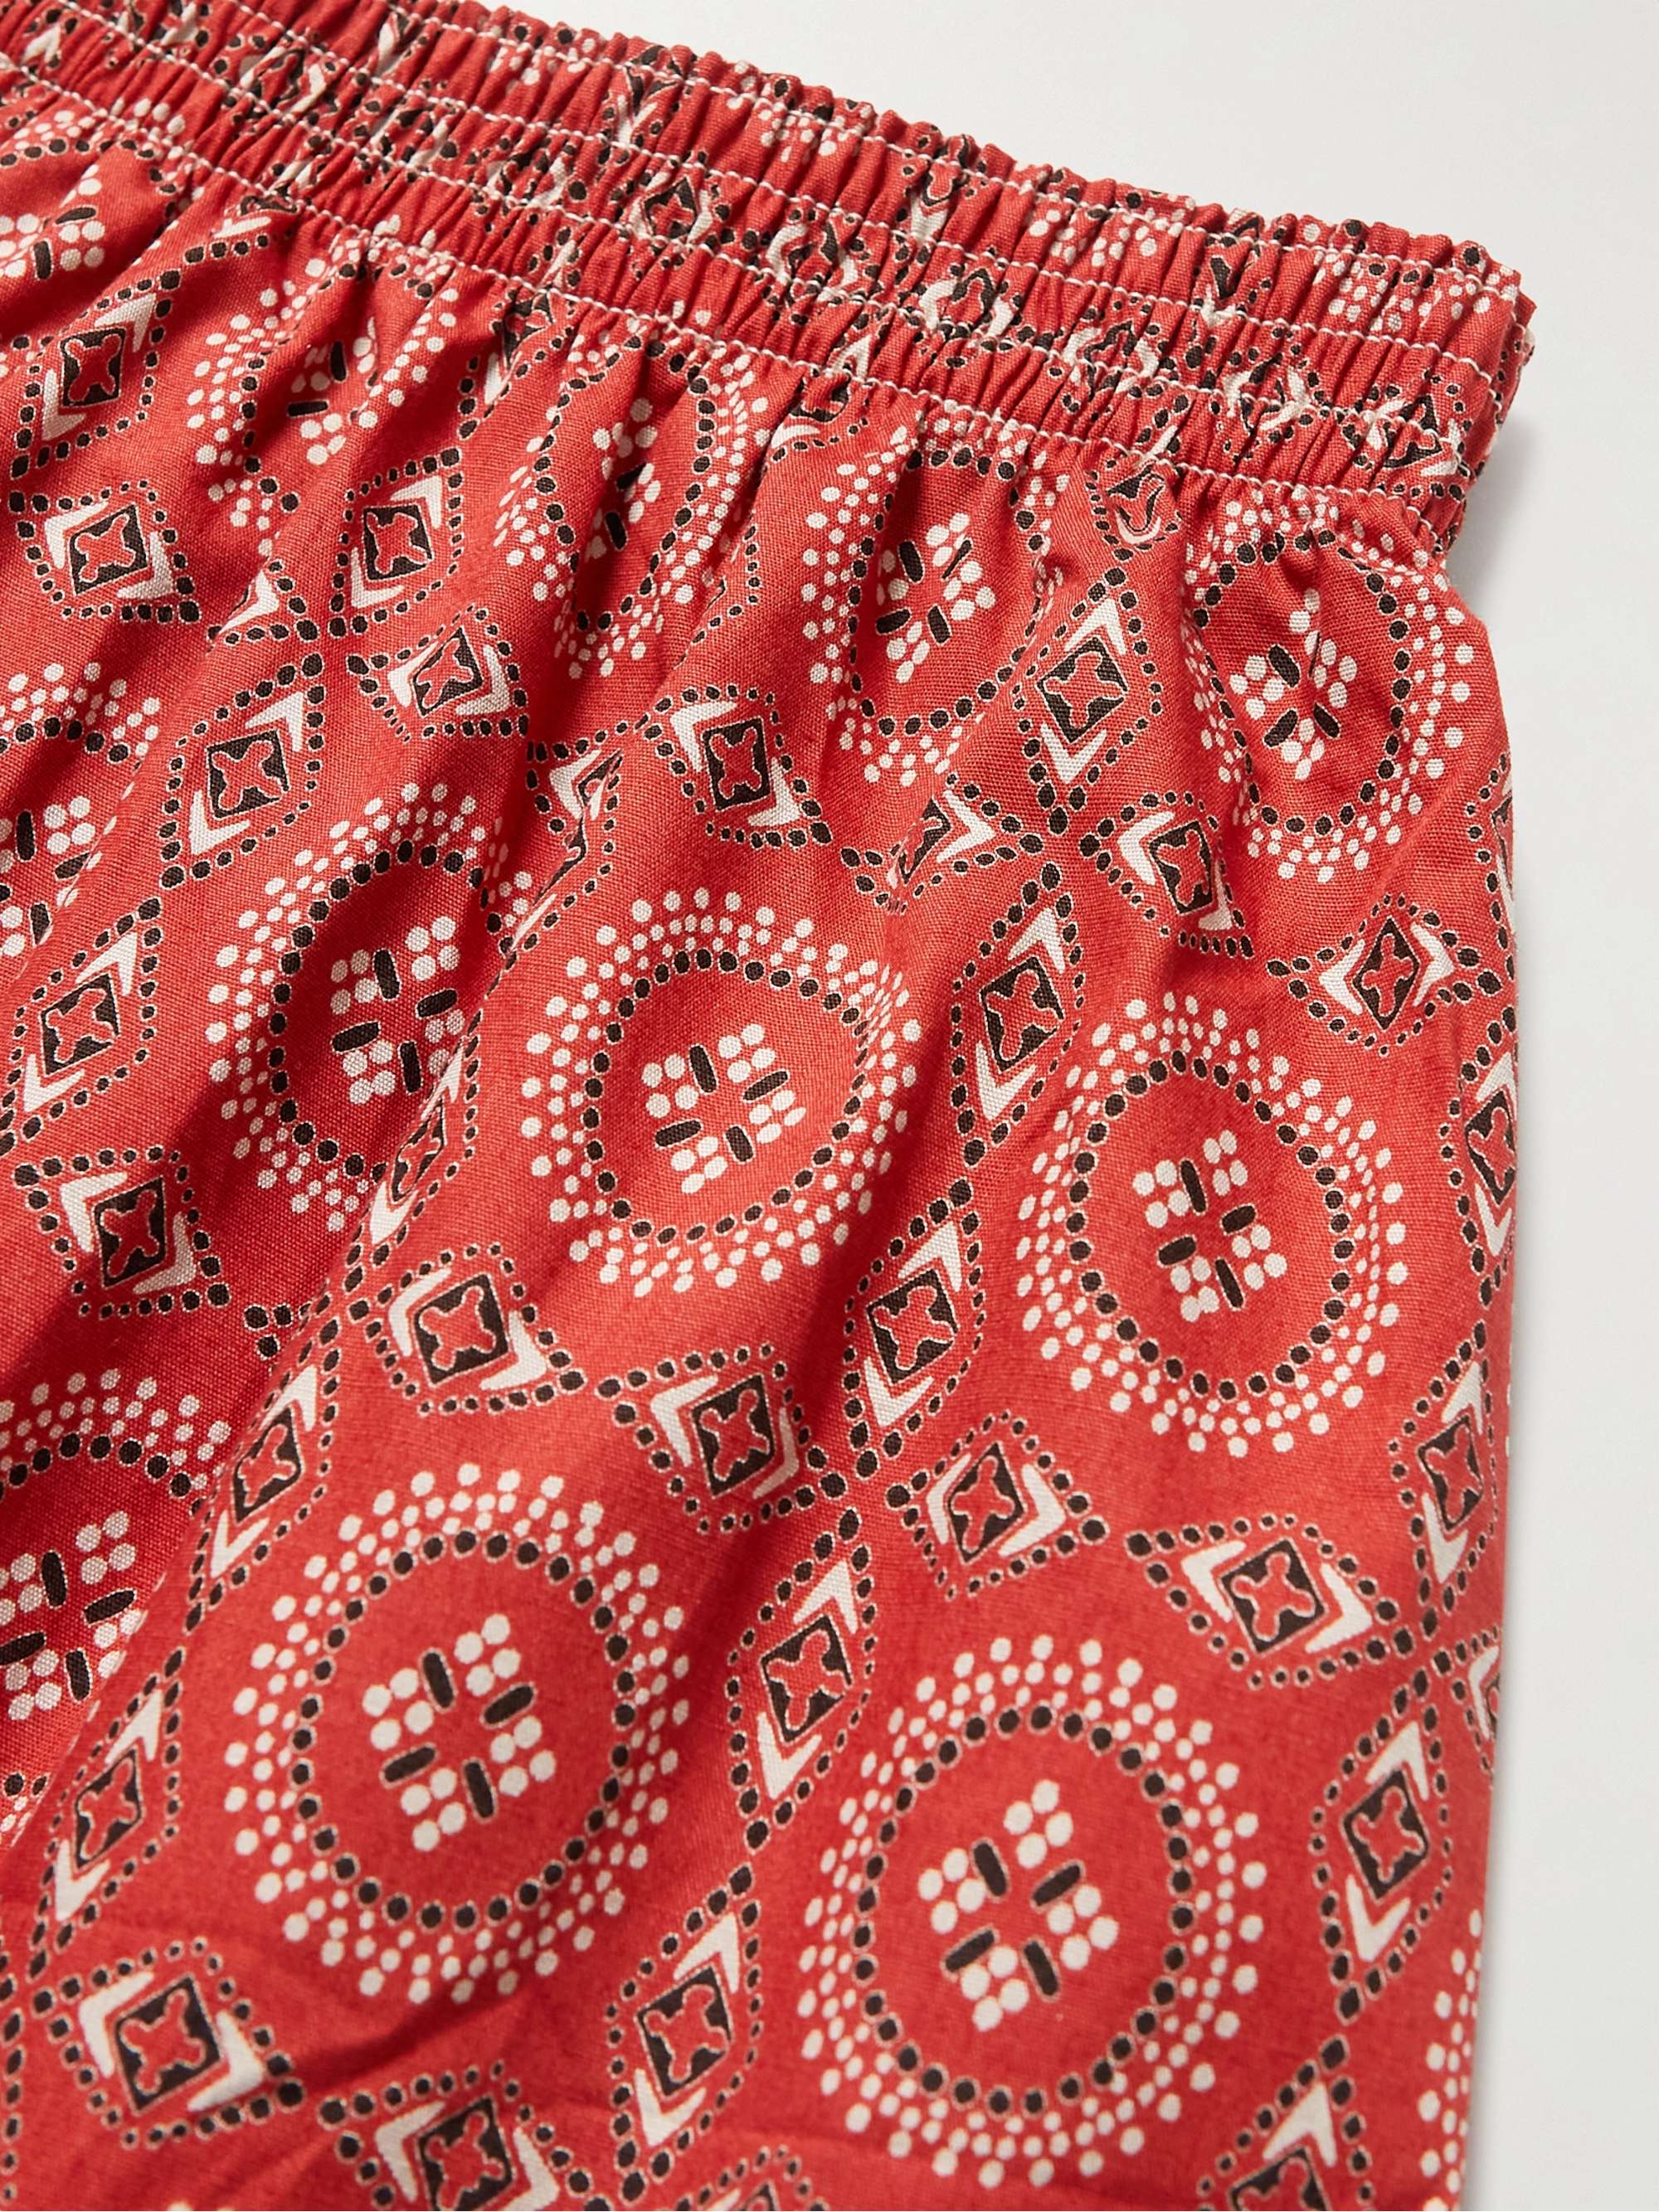 ANONYMOUS ISM Printed Cotton Boxer Shorts